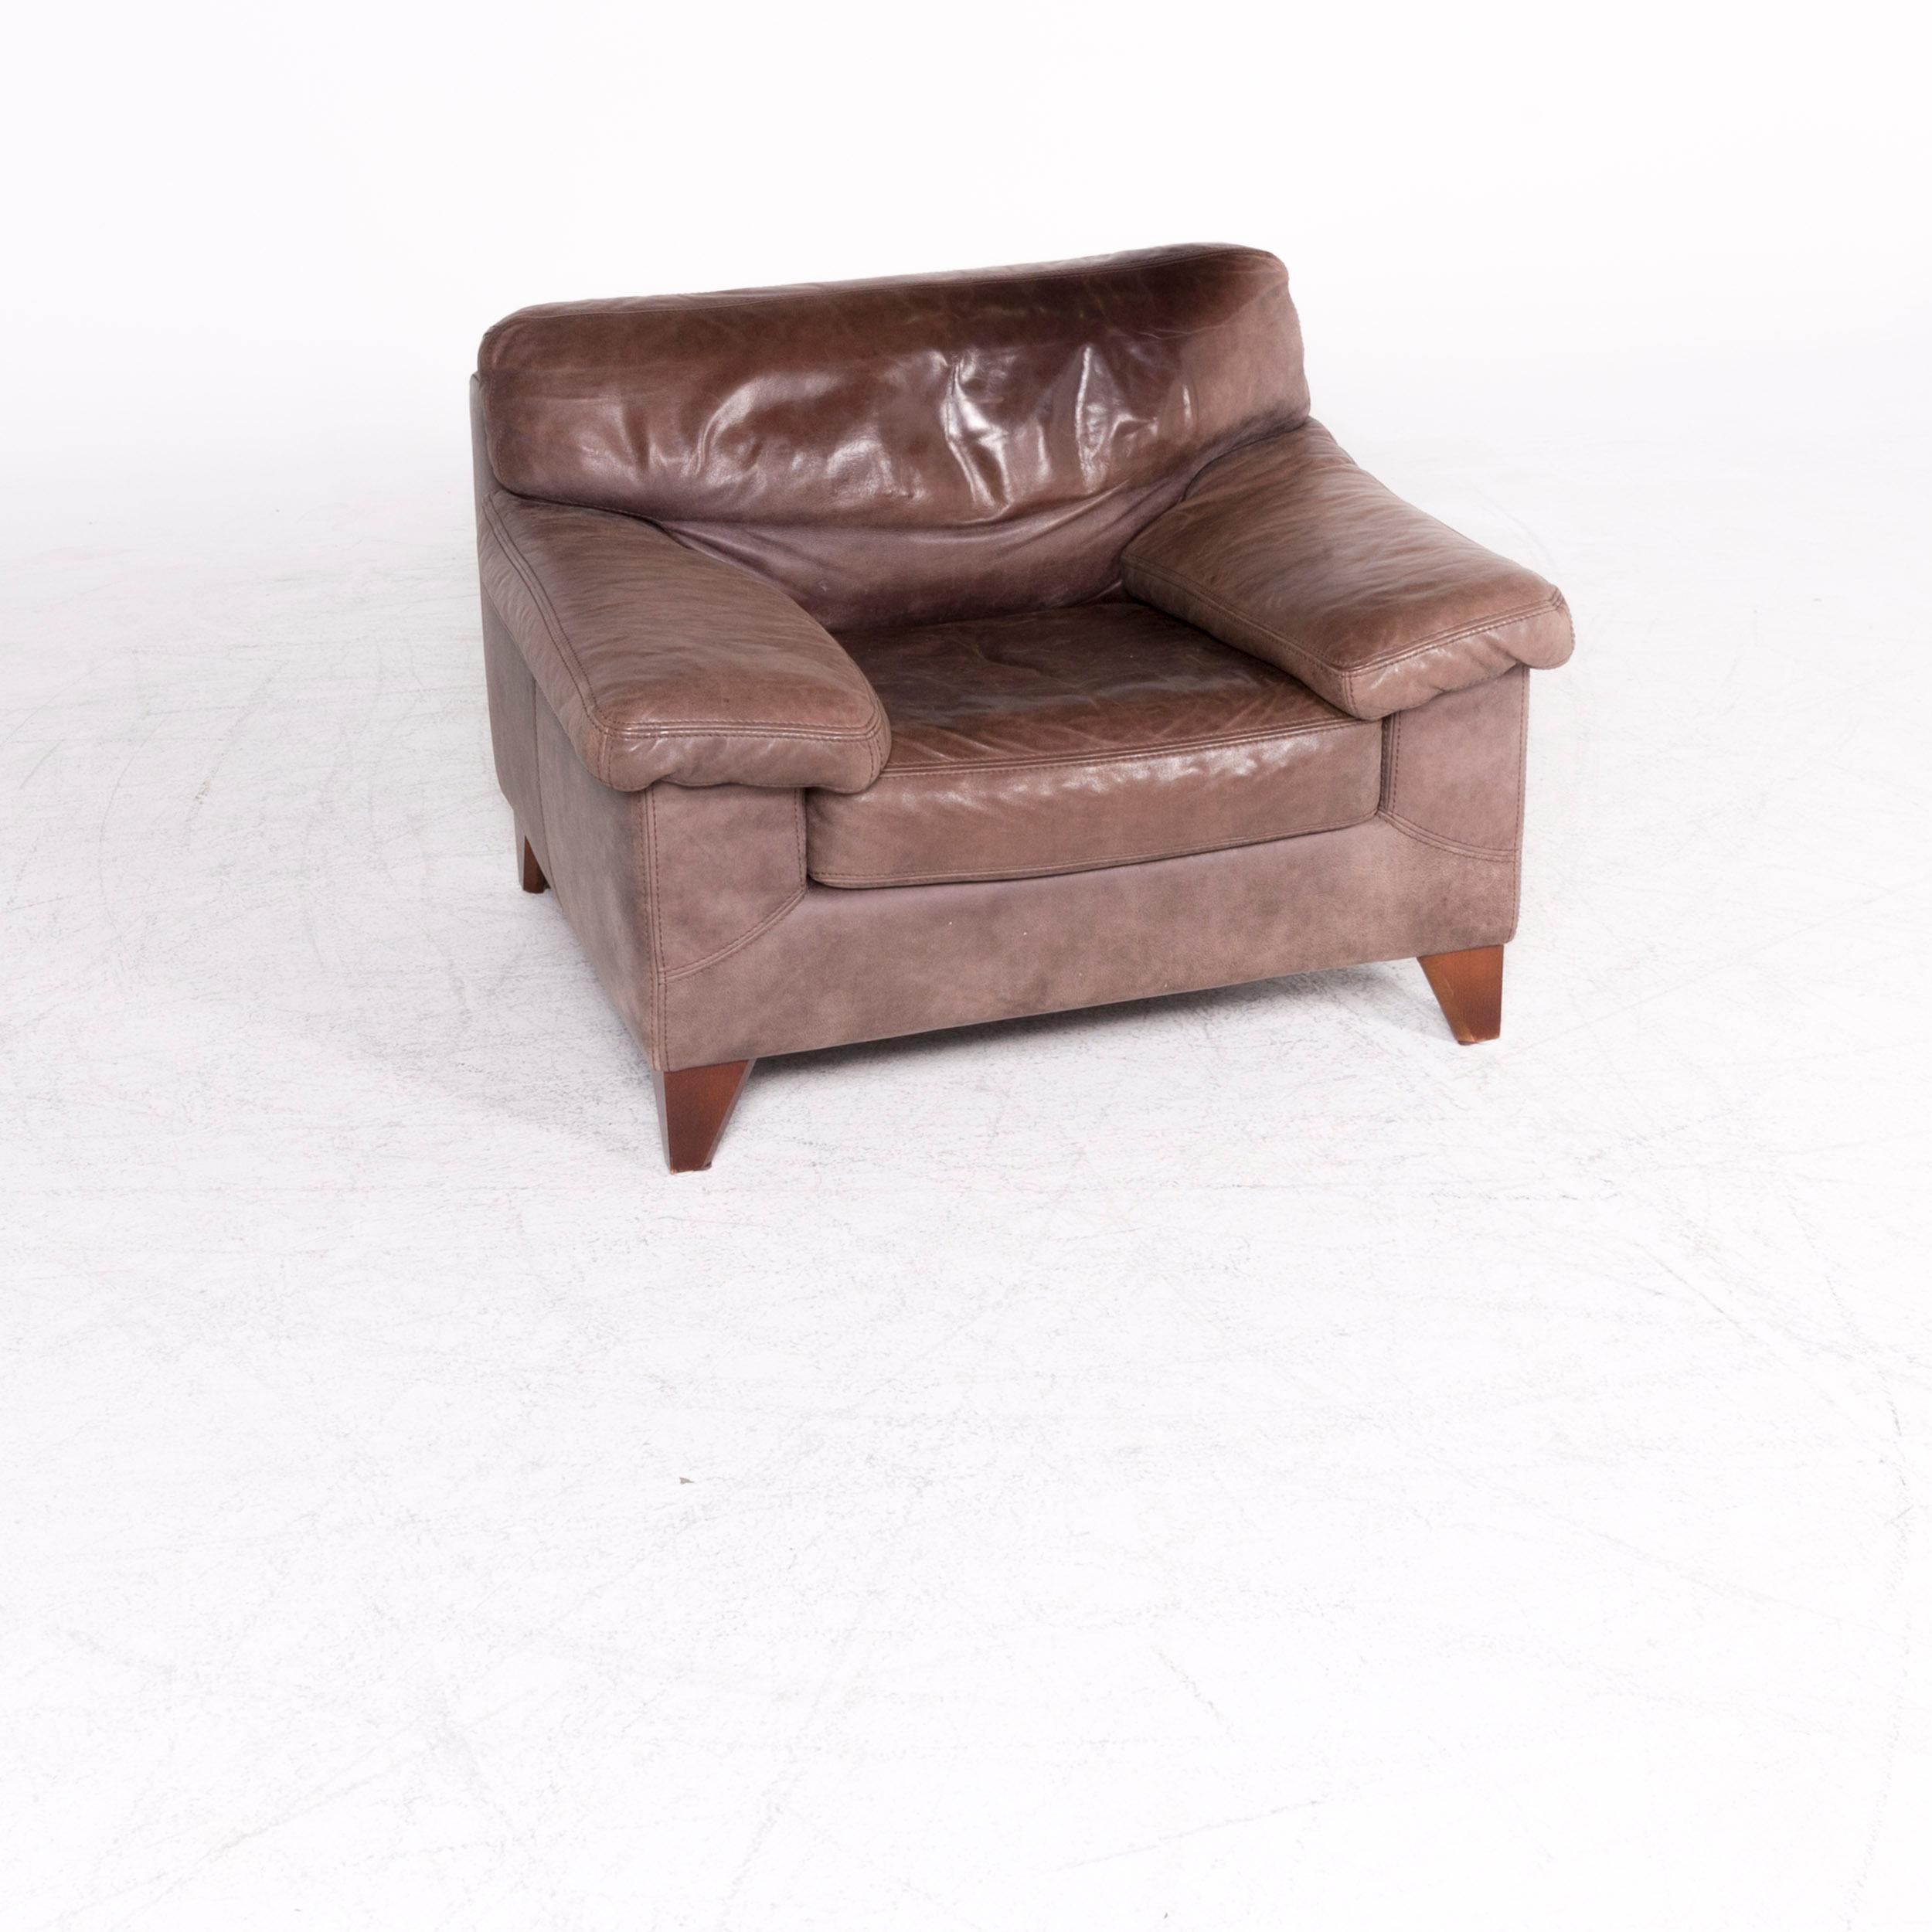 We bring to you a Machalke Diego designer leather armchair brown by Teun Van Zanten Genuine.

Product measurements in centimeters:

Depth 97
Width 107
Height 78
Seat-height 44
Rest-height 58
Seat-depth 51
Seat-width 43
Back-height